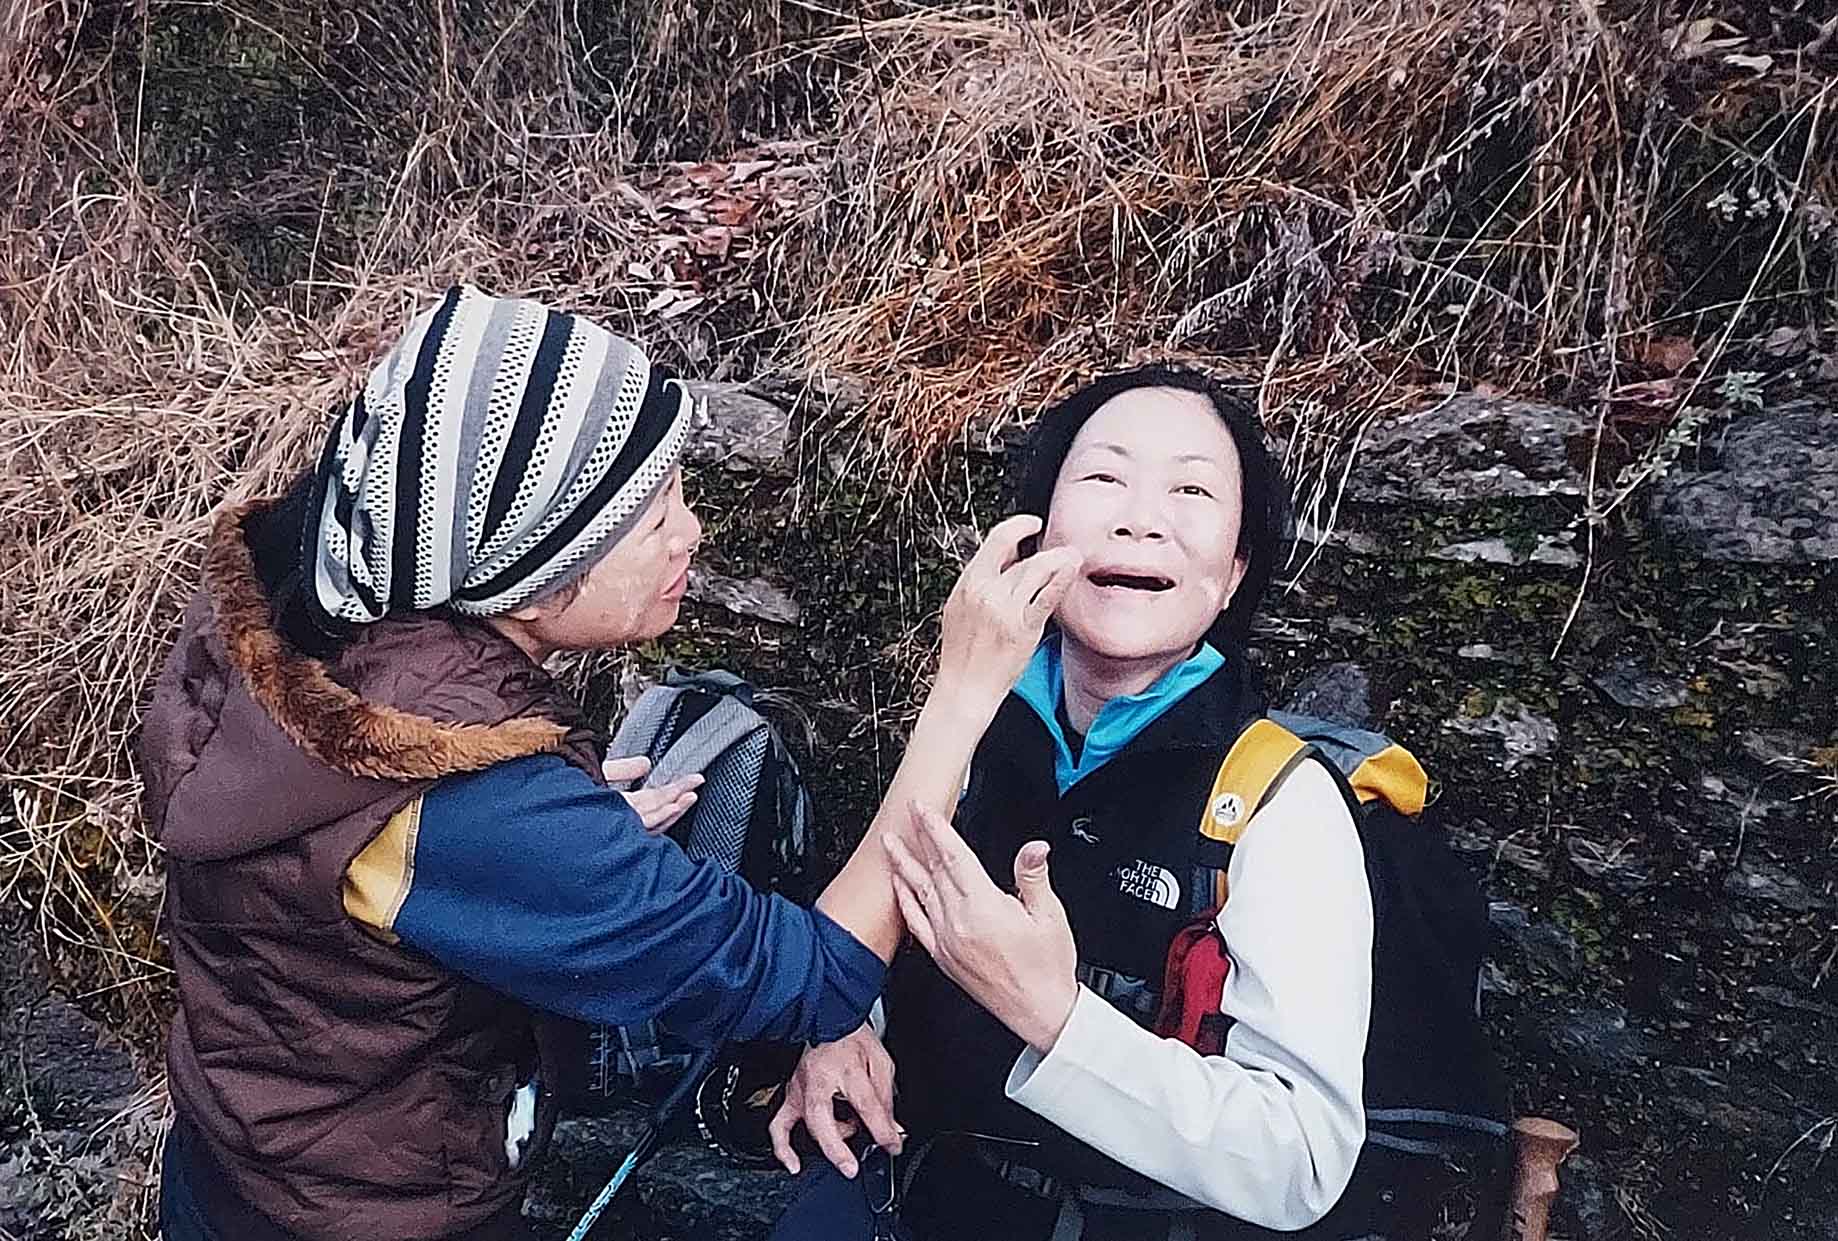 Shirley’s sister applies sunblock on Shirley’s face on a trek.